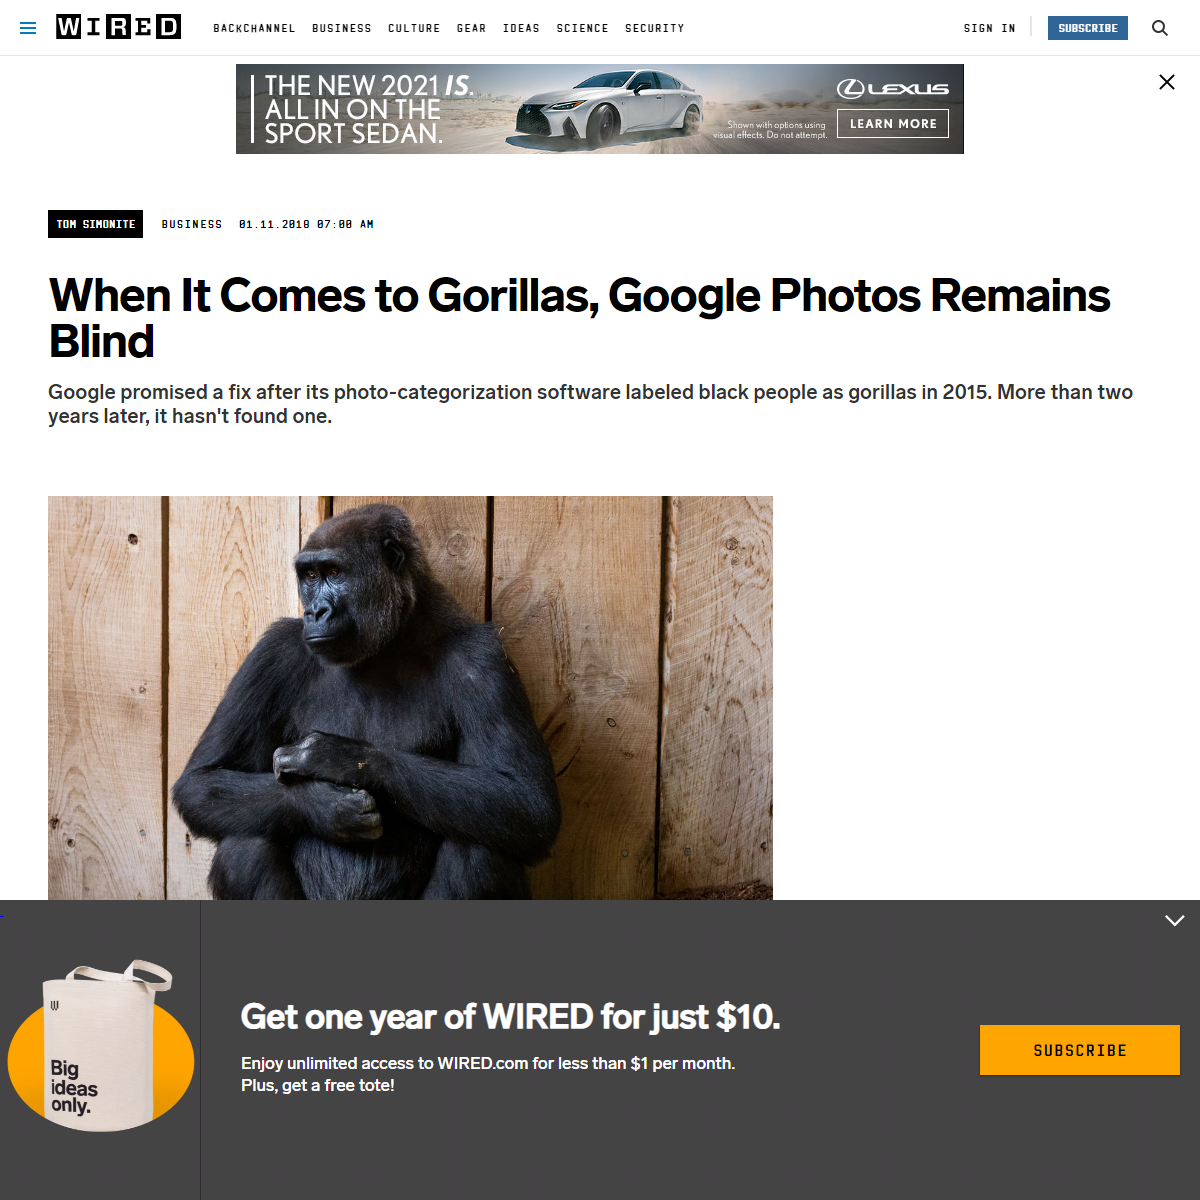 A complete backup of https://www.wired.com/story/when-it-comes-to-gorillas-google-photos-remains-blind/